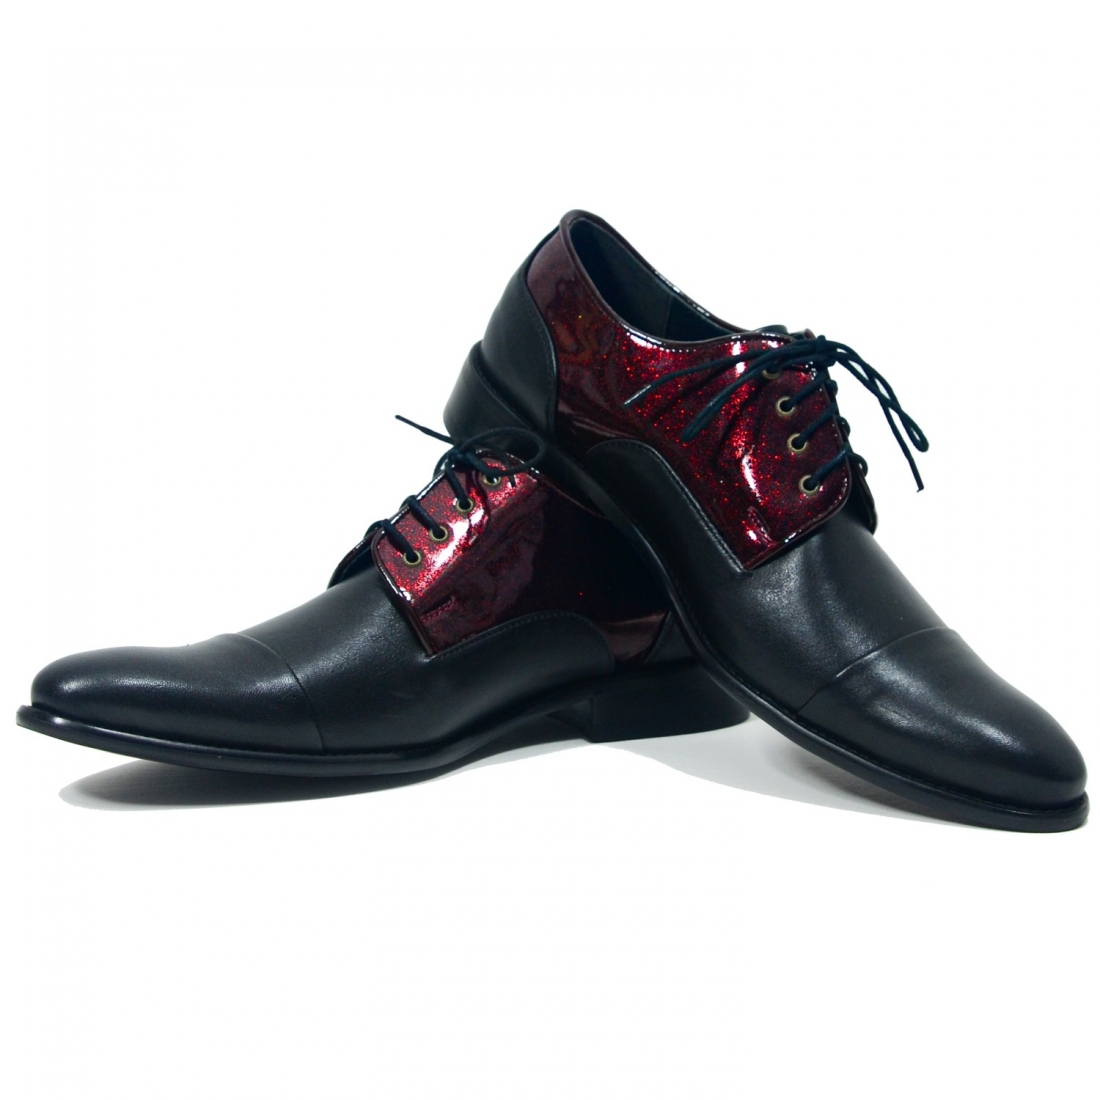 Modello Chuvry - Chaussure Classique - Handmade Colorful Italian Leather Shoes